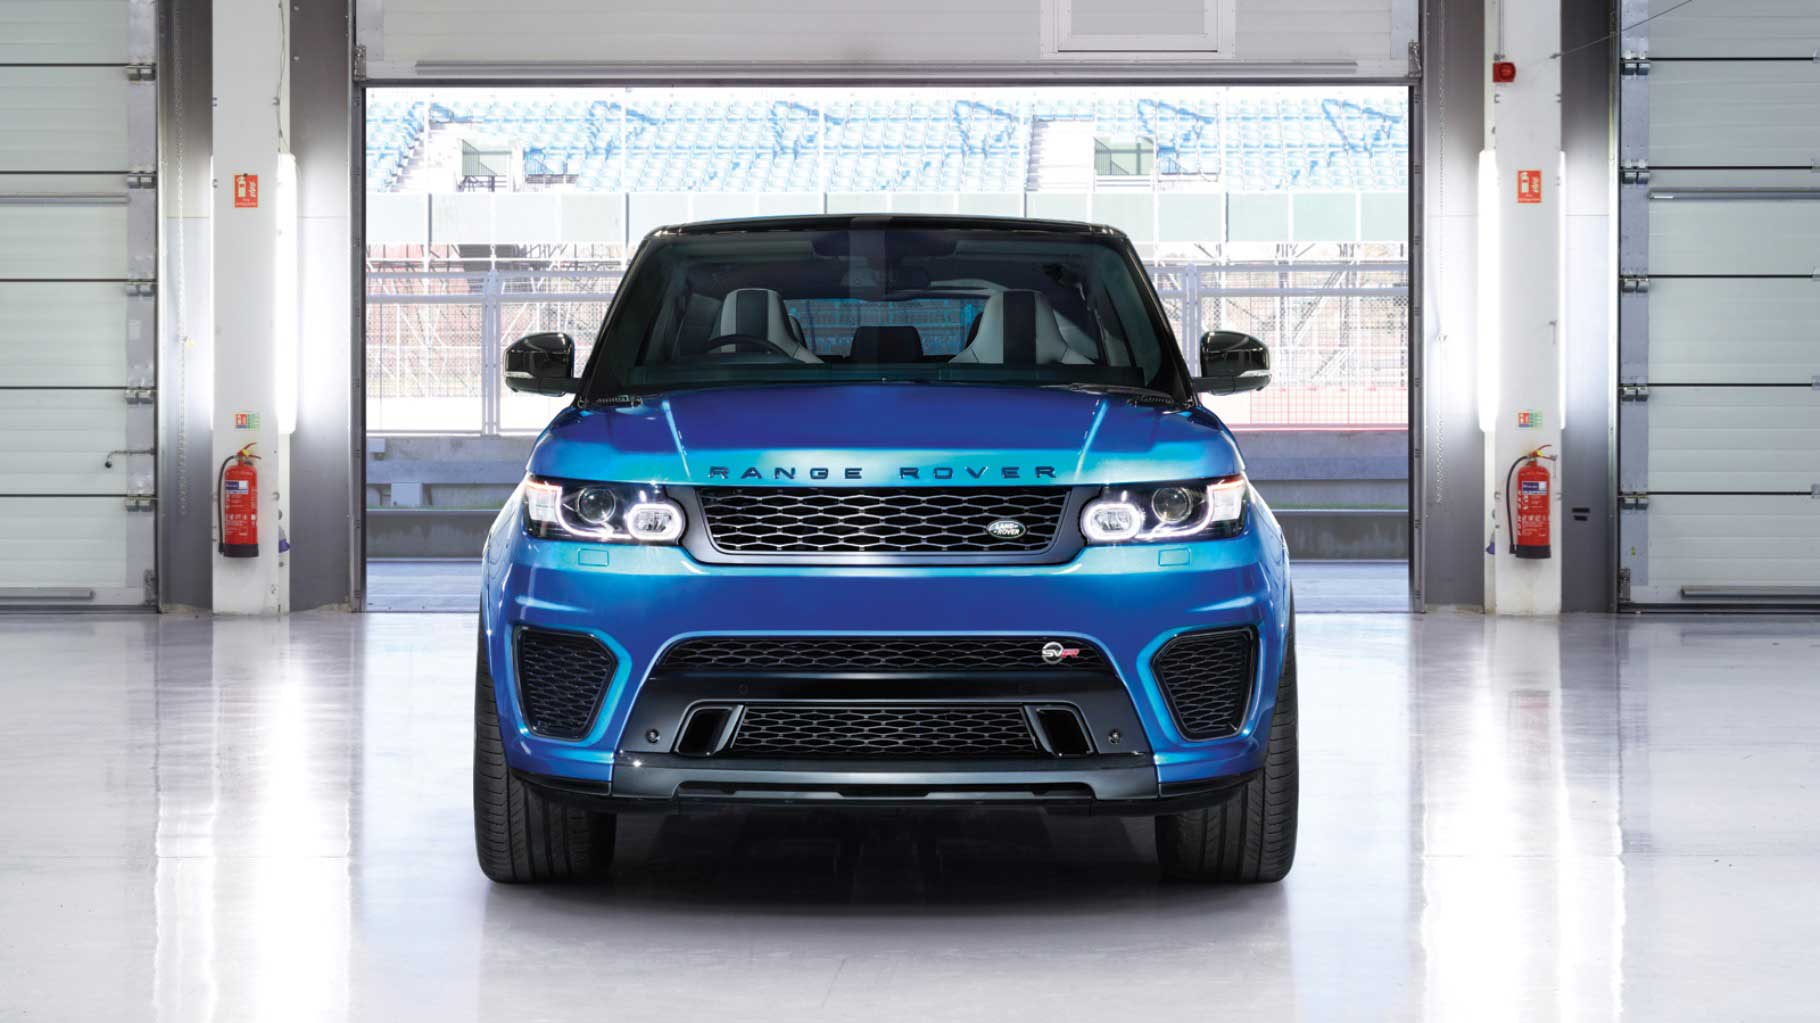 Land Rover Range Rover Sport V8 SC Autobiography Exterior front view